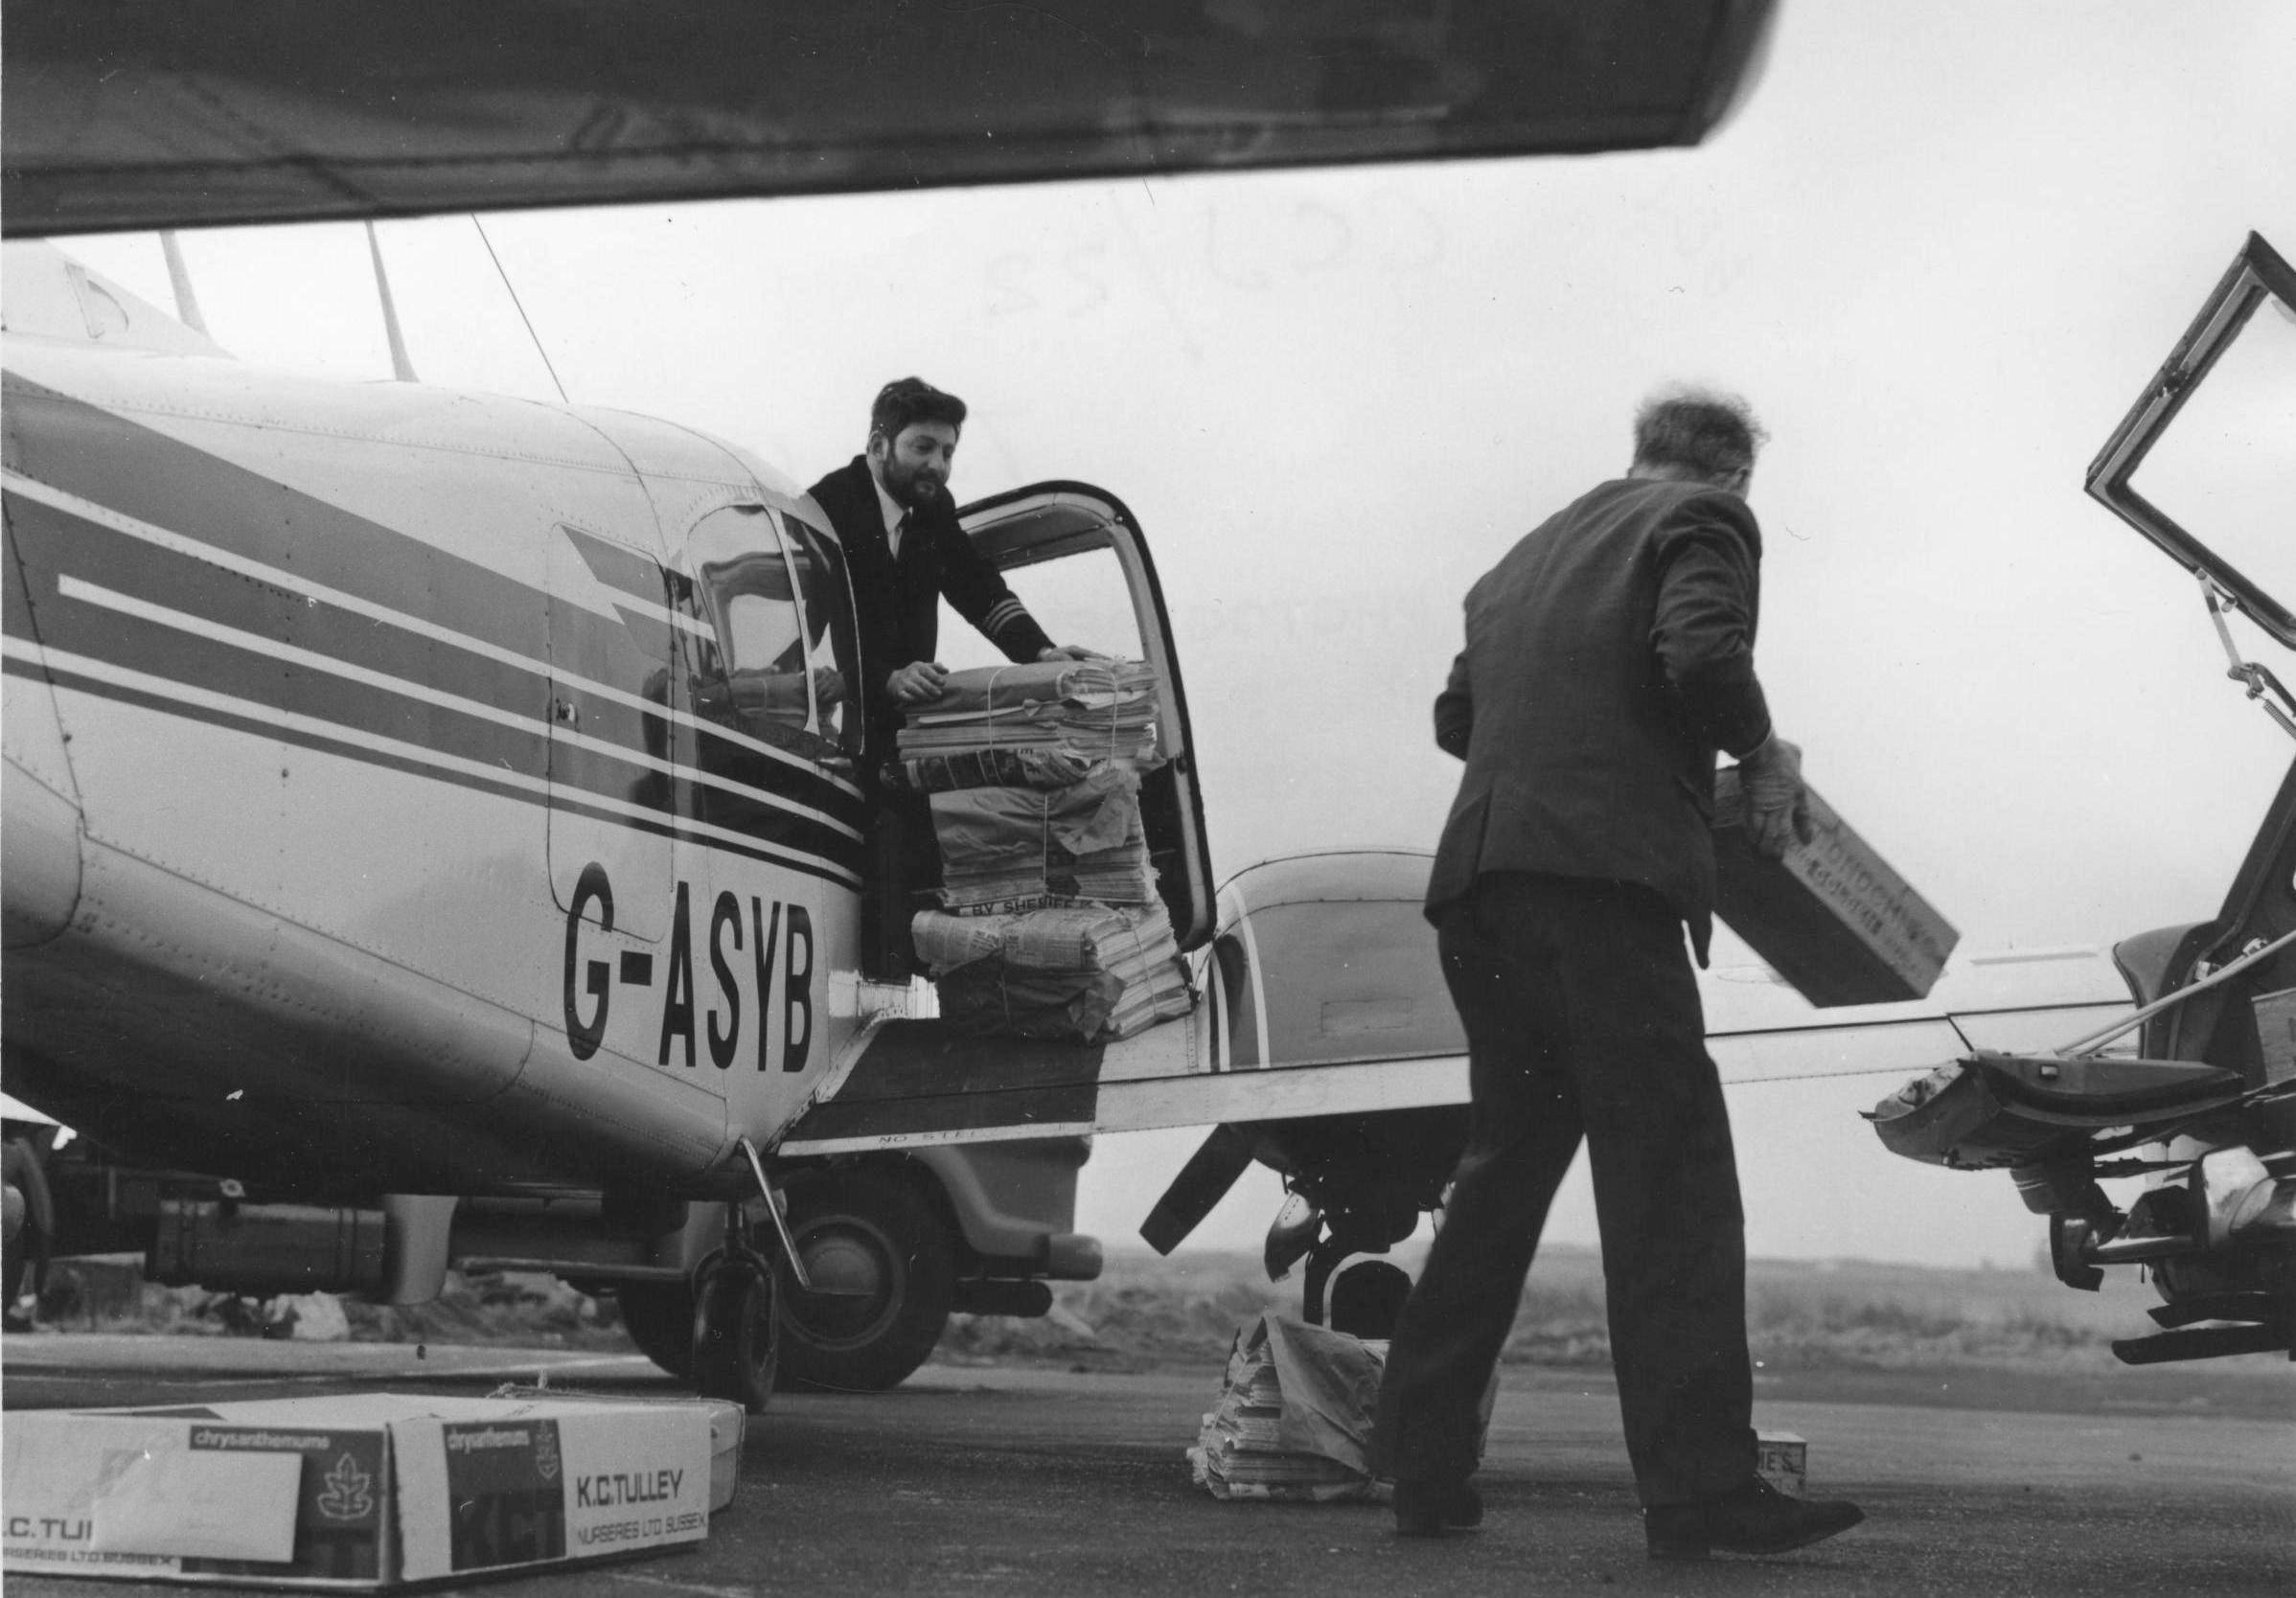 Paper round: newspaper delivery has long been part of the Loganair service